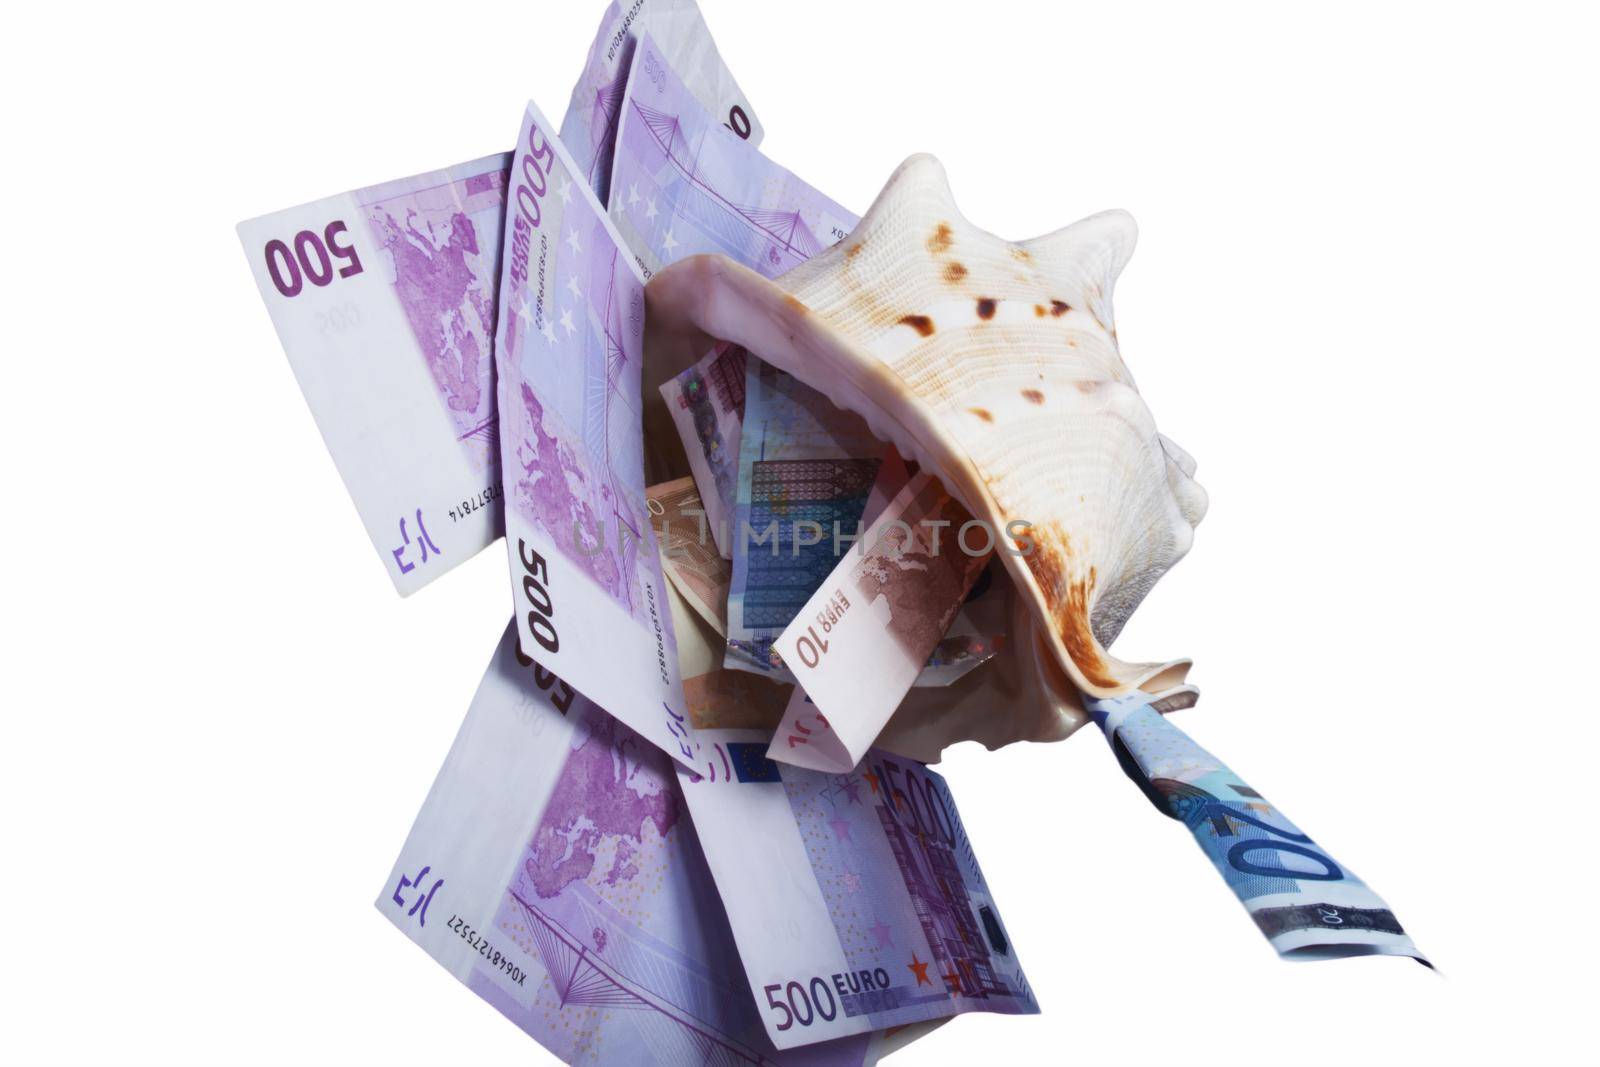 banknotes are in denominations of 500, 20,10, euros are in a sea shell by client111